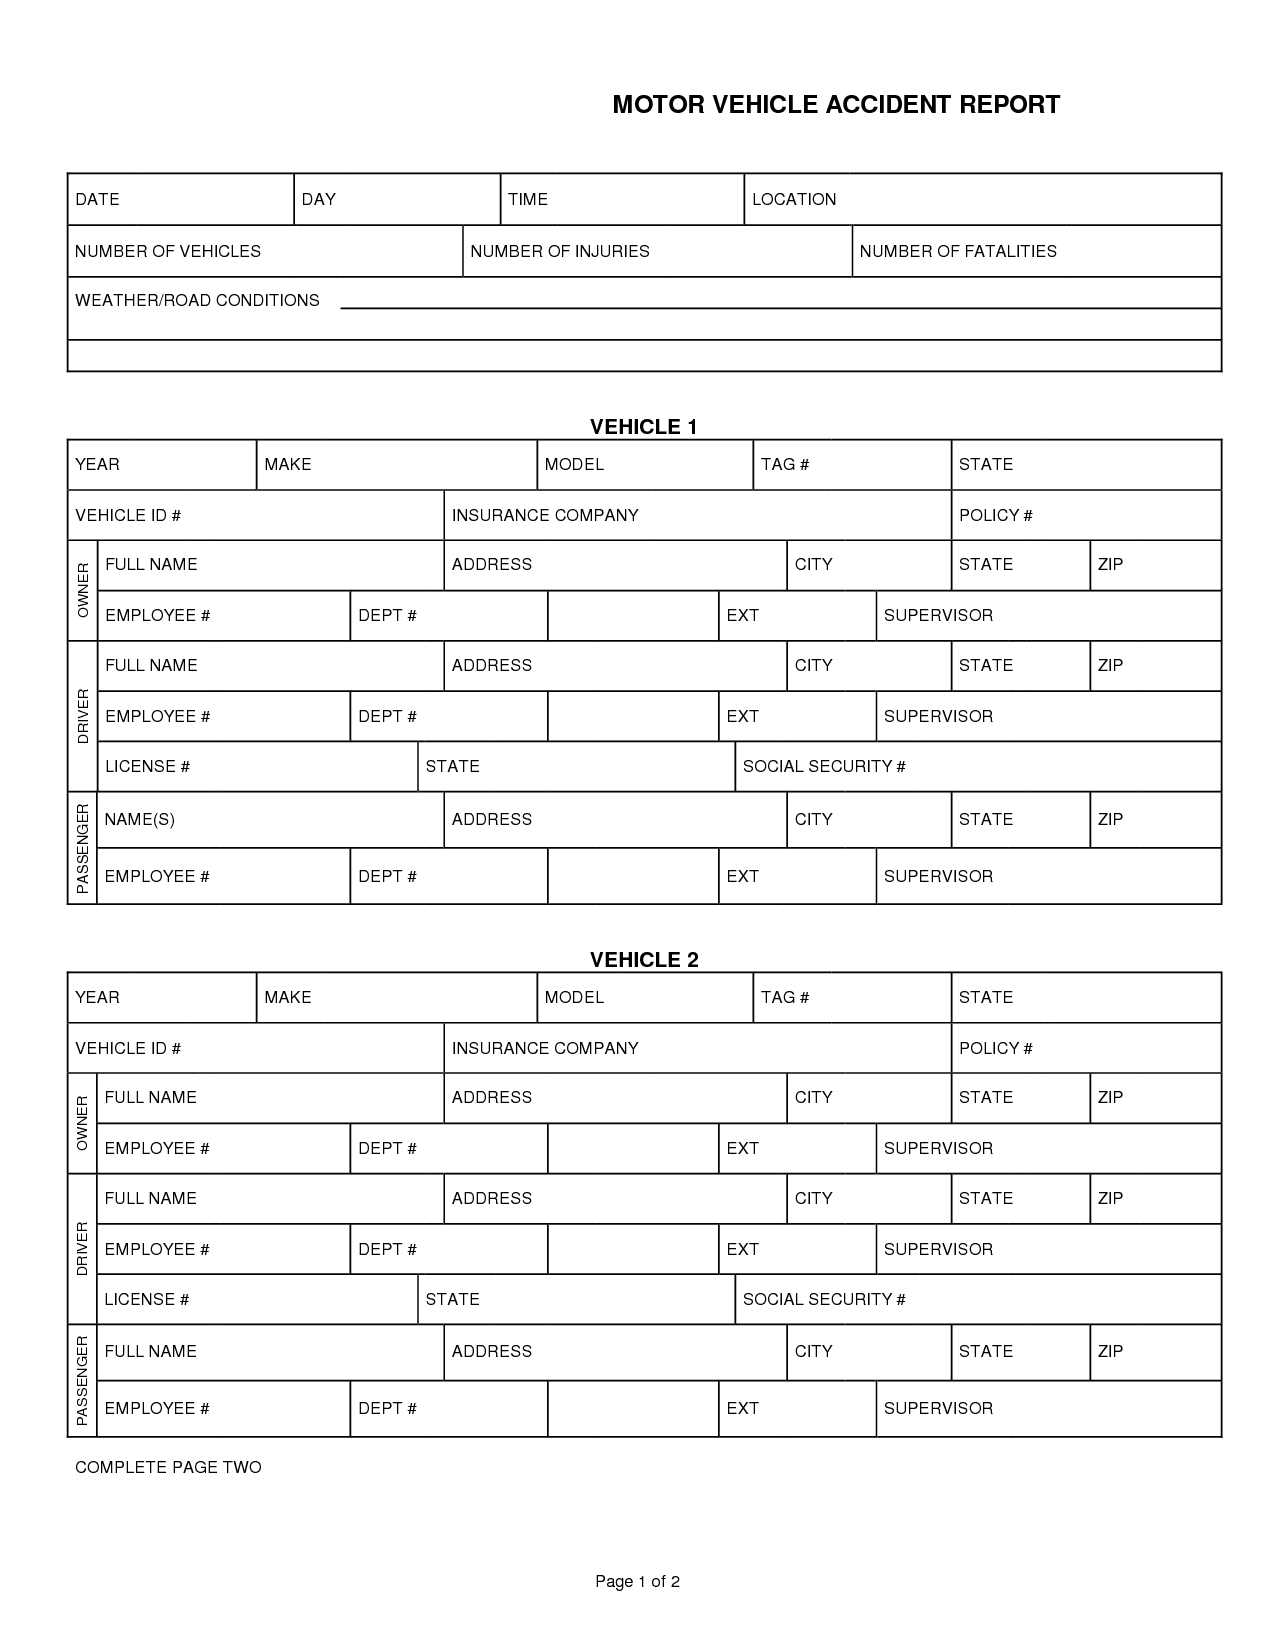 008 Car Accident Report Form Template 290132 Vehicle Inside Motor Vehicle Accident Report Form Template